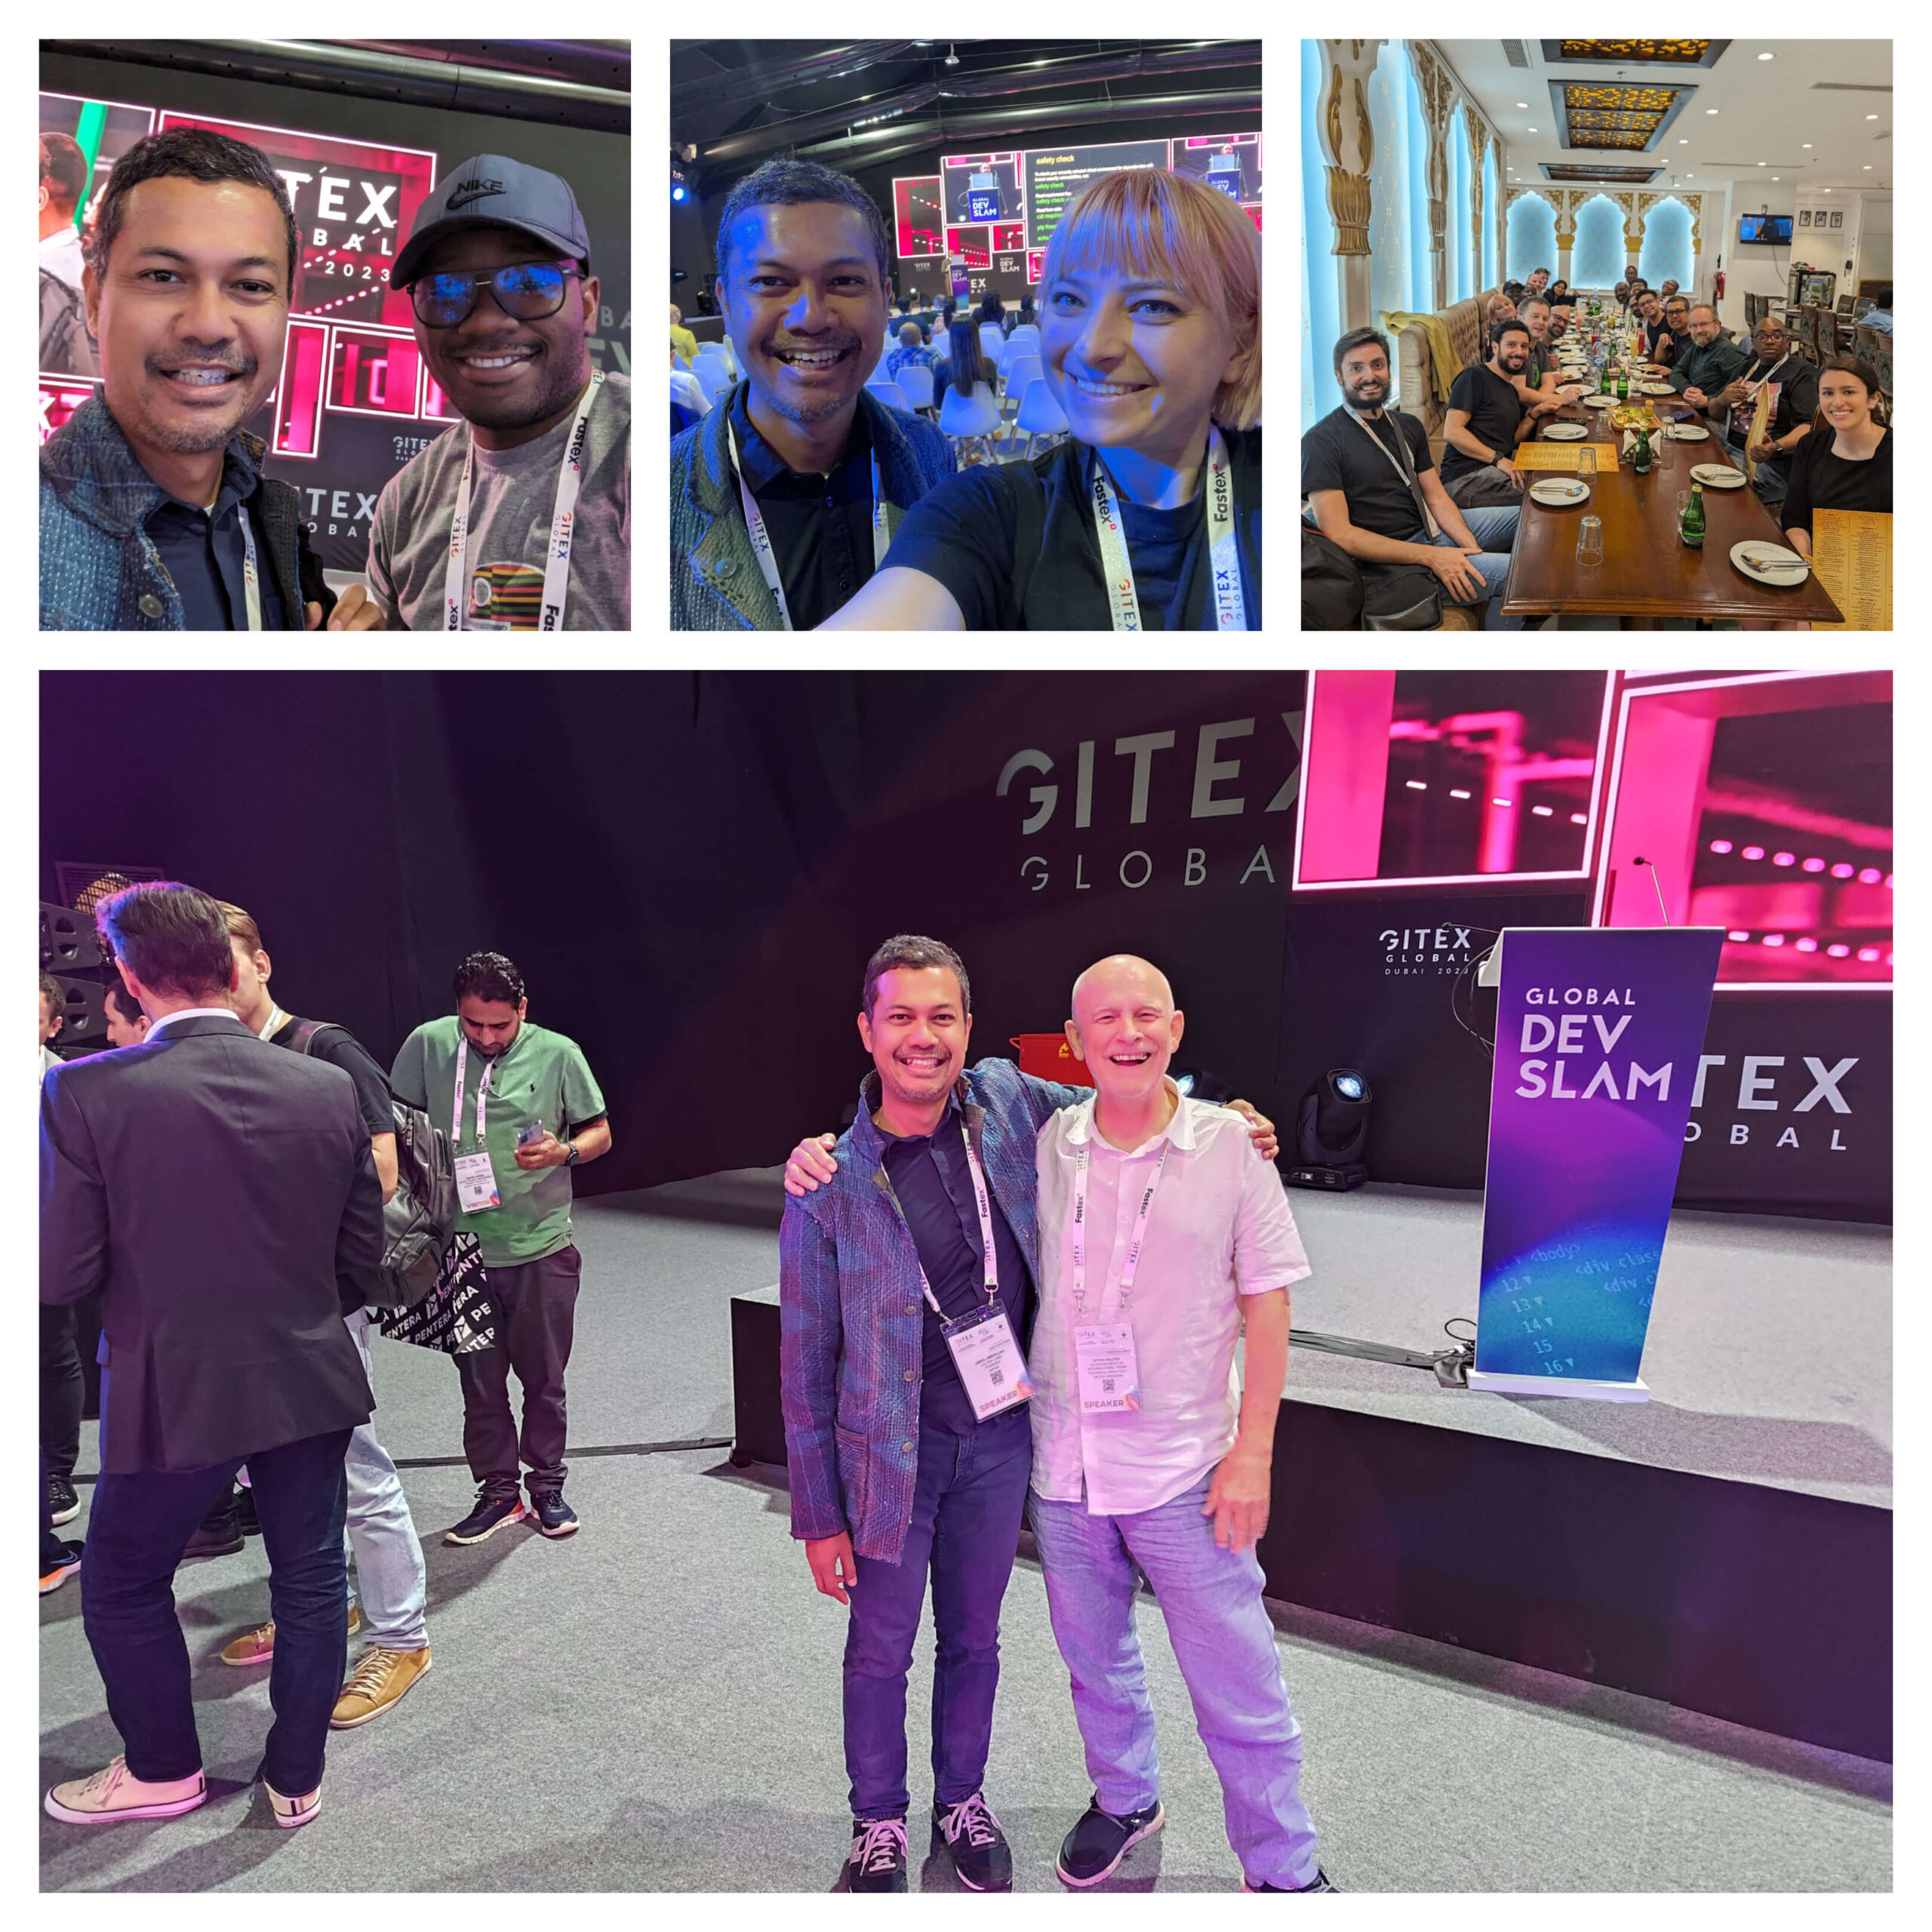 A collage of selfies and people eating with GITEX Global DevSlam setup in the background